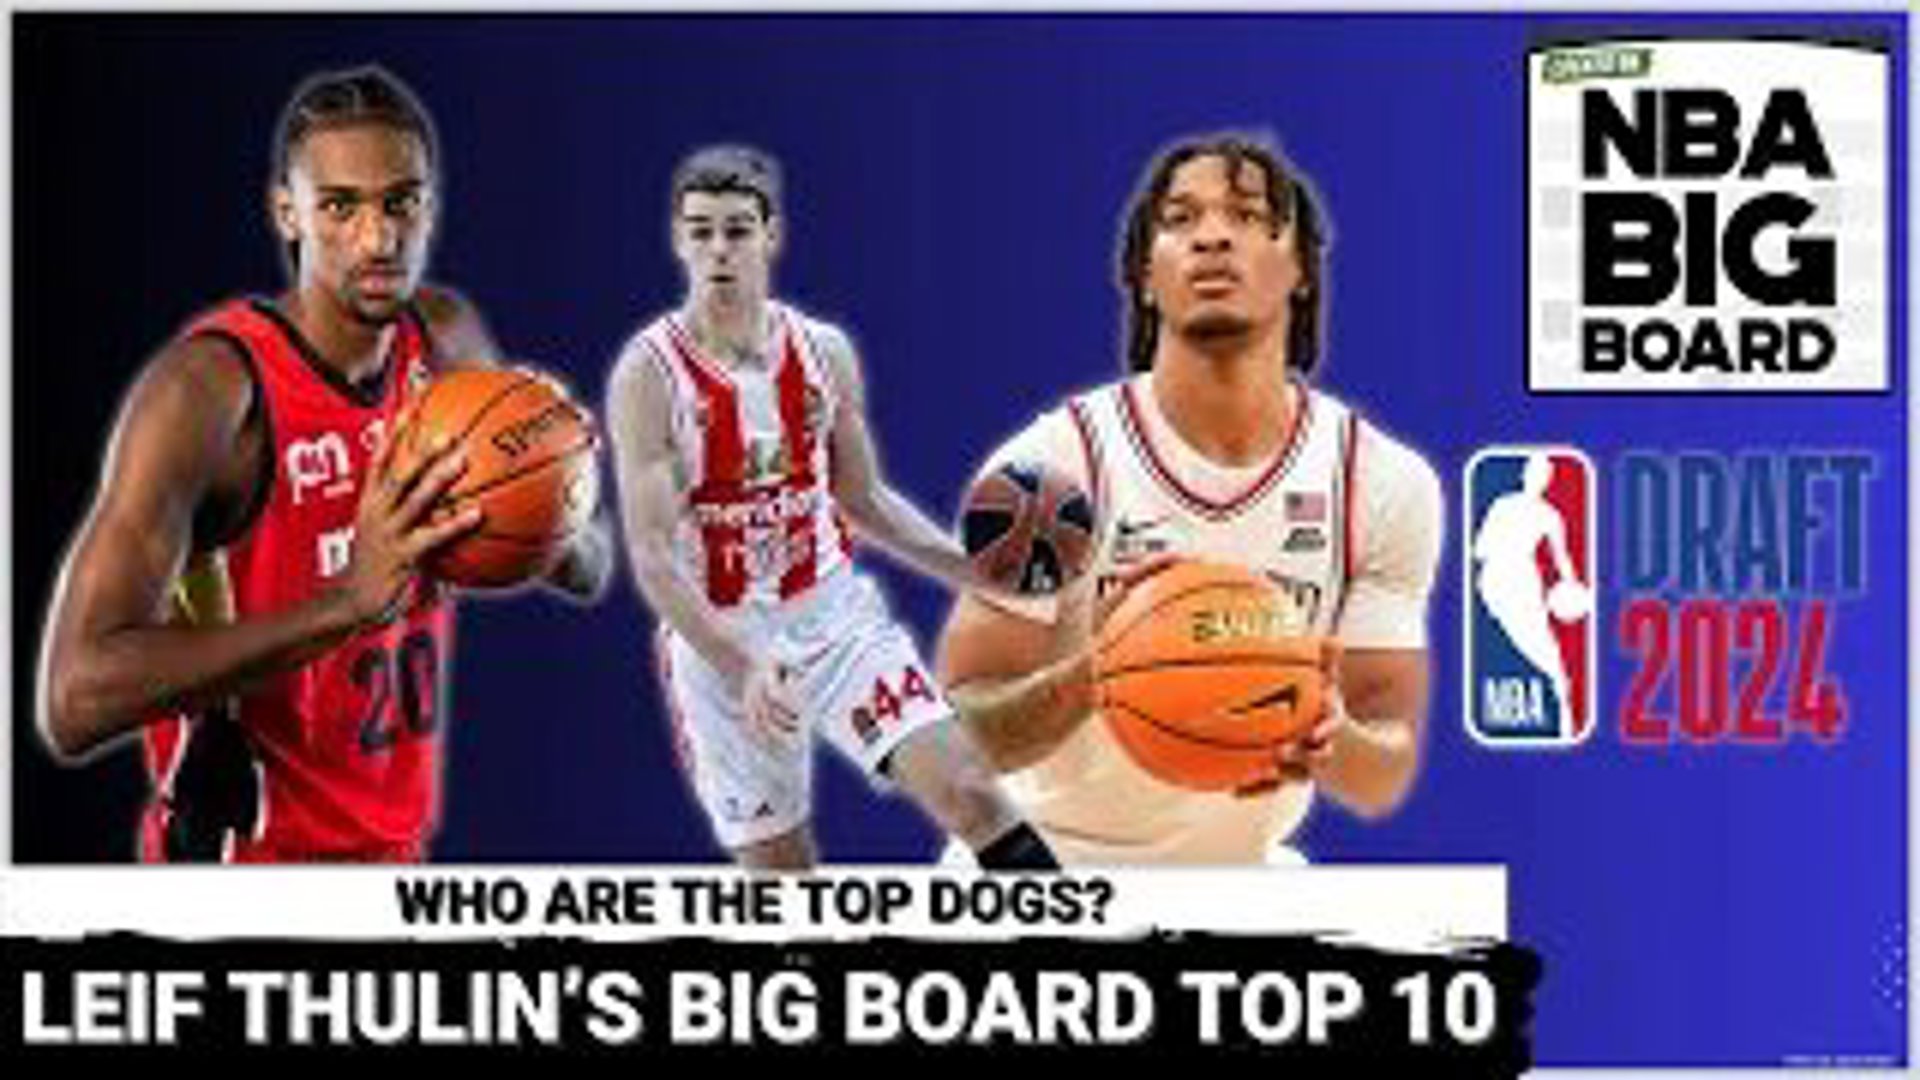 Leif Thulin and James Barlowe discuss Leif's first Big Board of the year. They analyze rankings 1-10 and discuss/ debate the roles they foresee for each player.